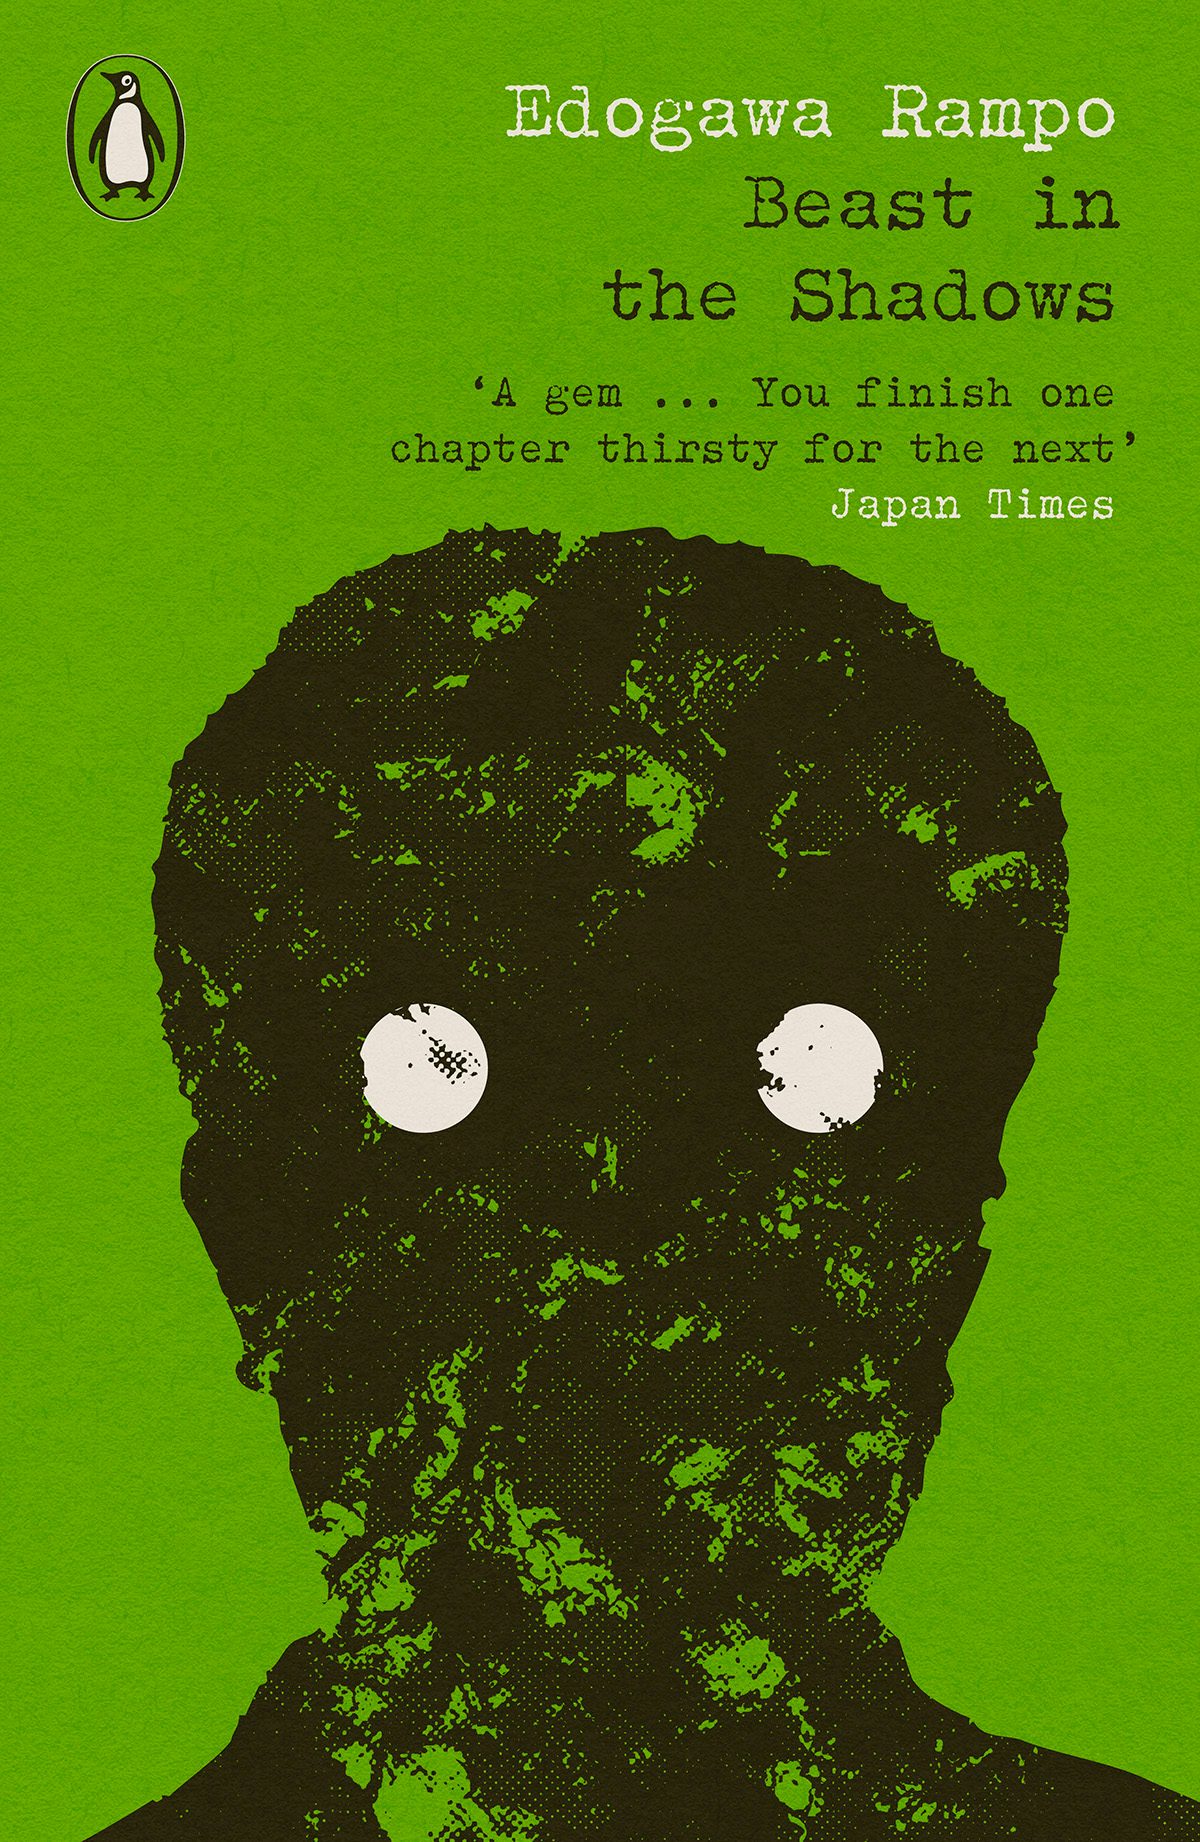 Image shows the cover of Beast in the Shadows from Penguin Modern Classics Crime and Espionage series, featuring a vibrant green background and the shape of a face made out of fingerprint-like blotches